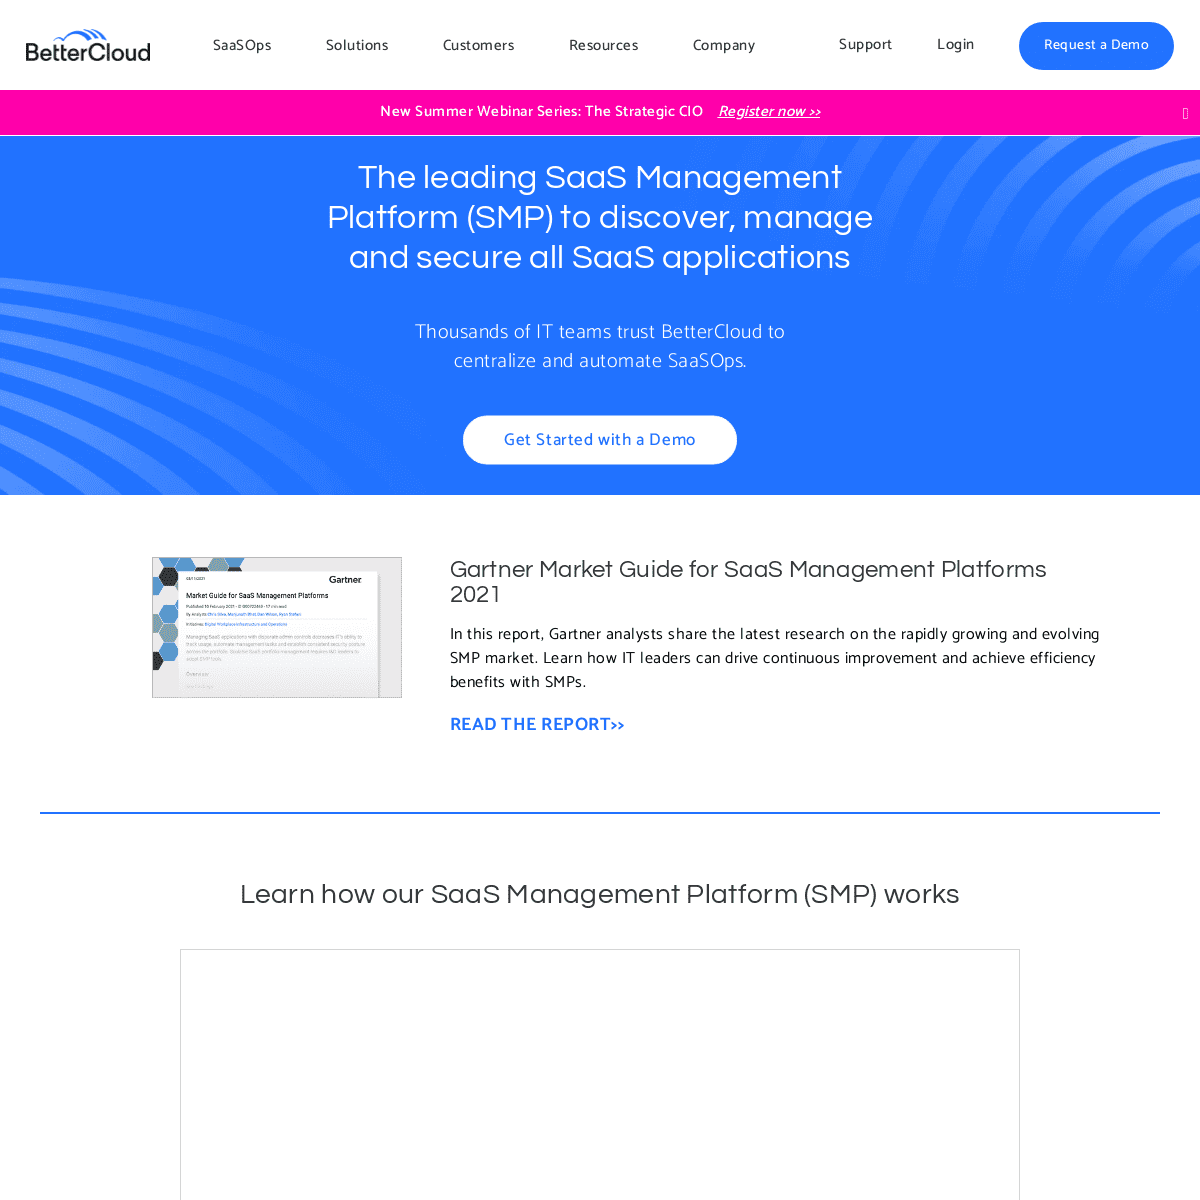 A complete backup of https://bettercloud.com